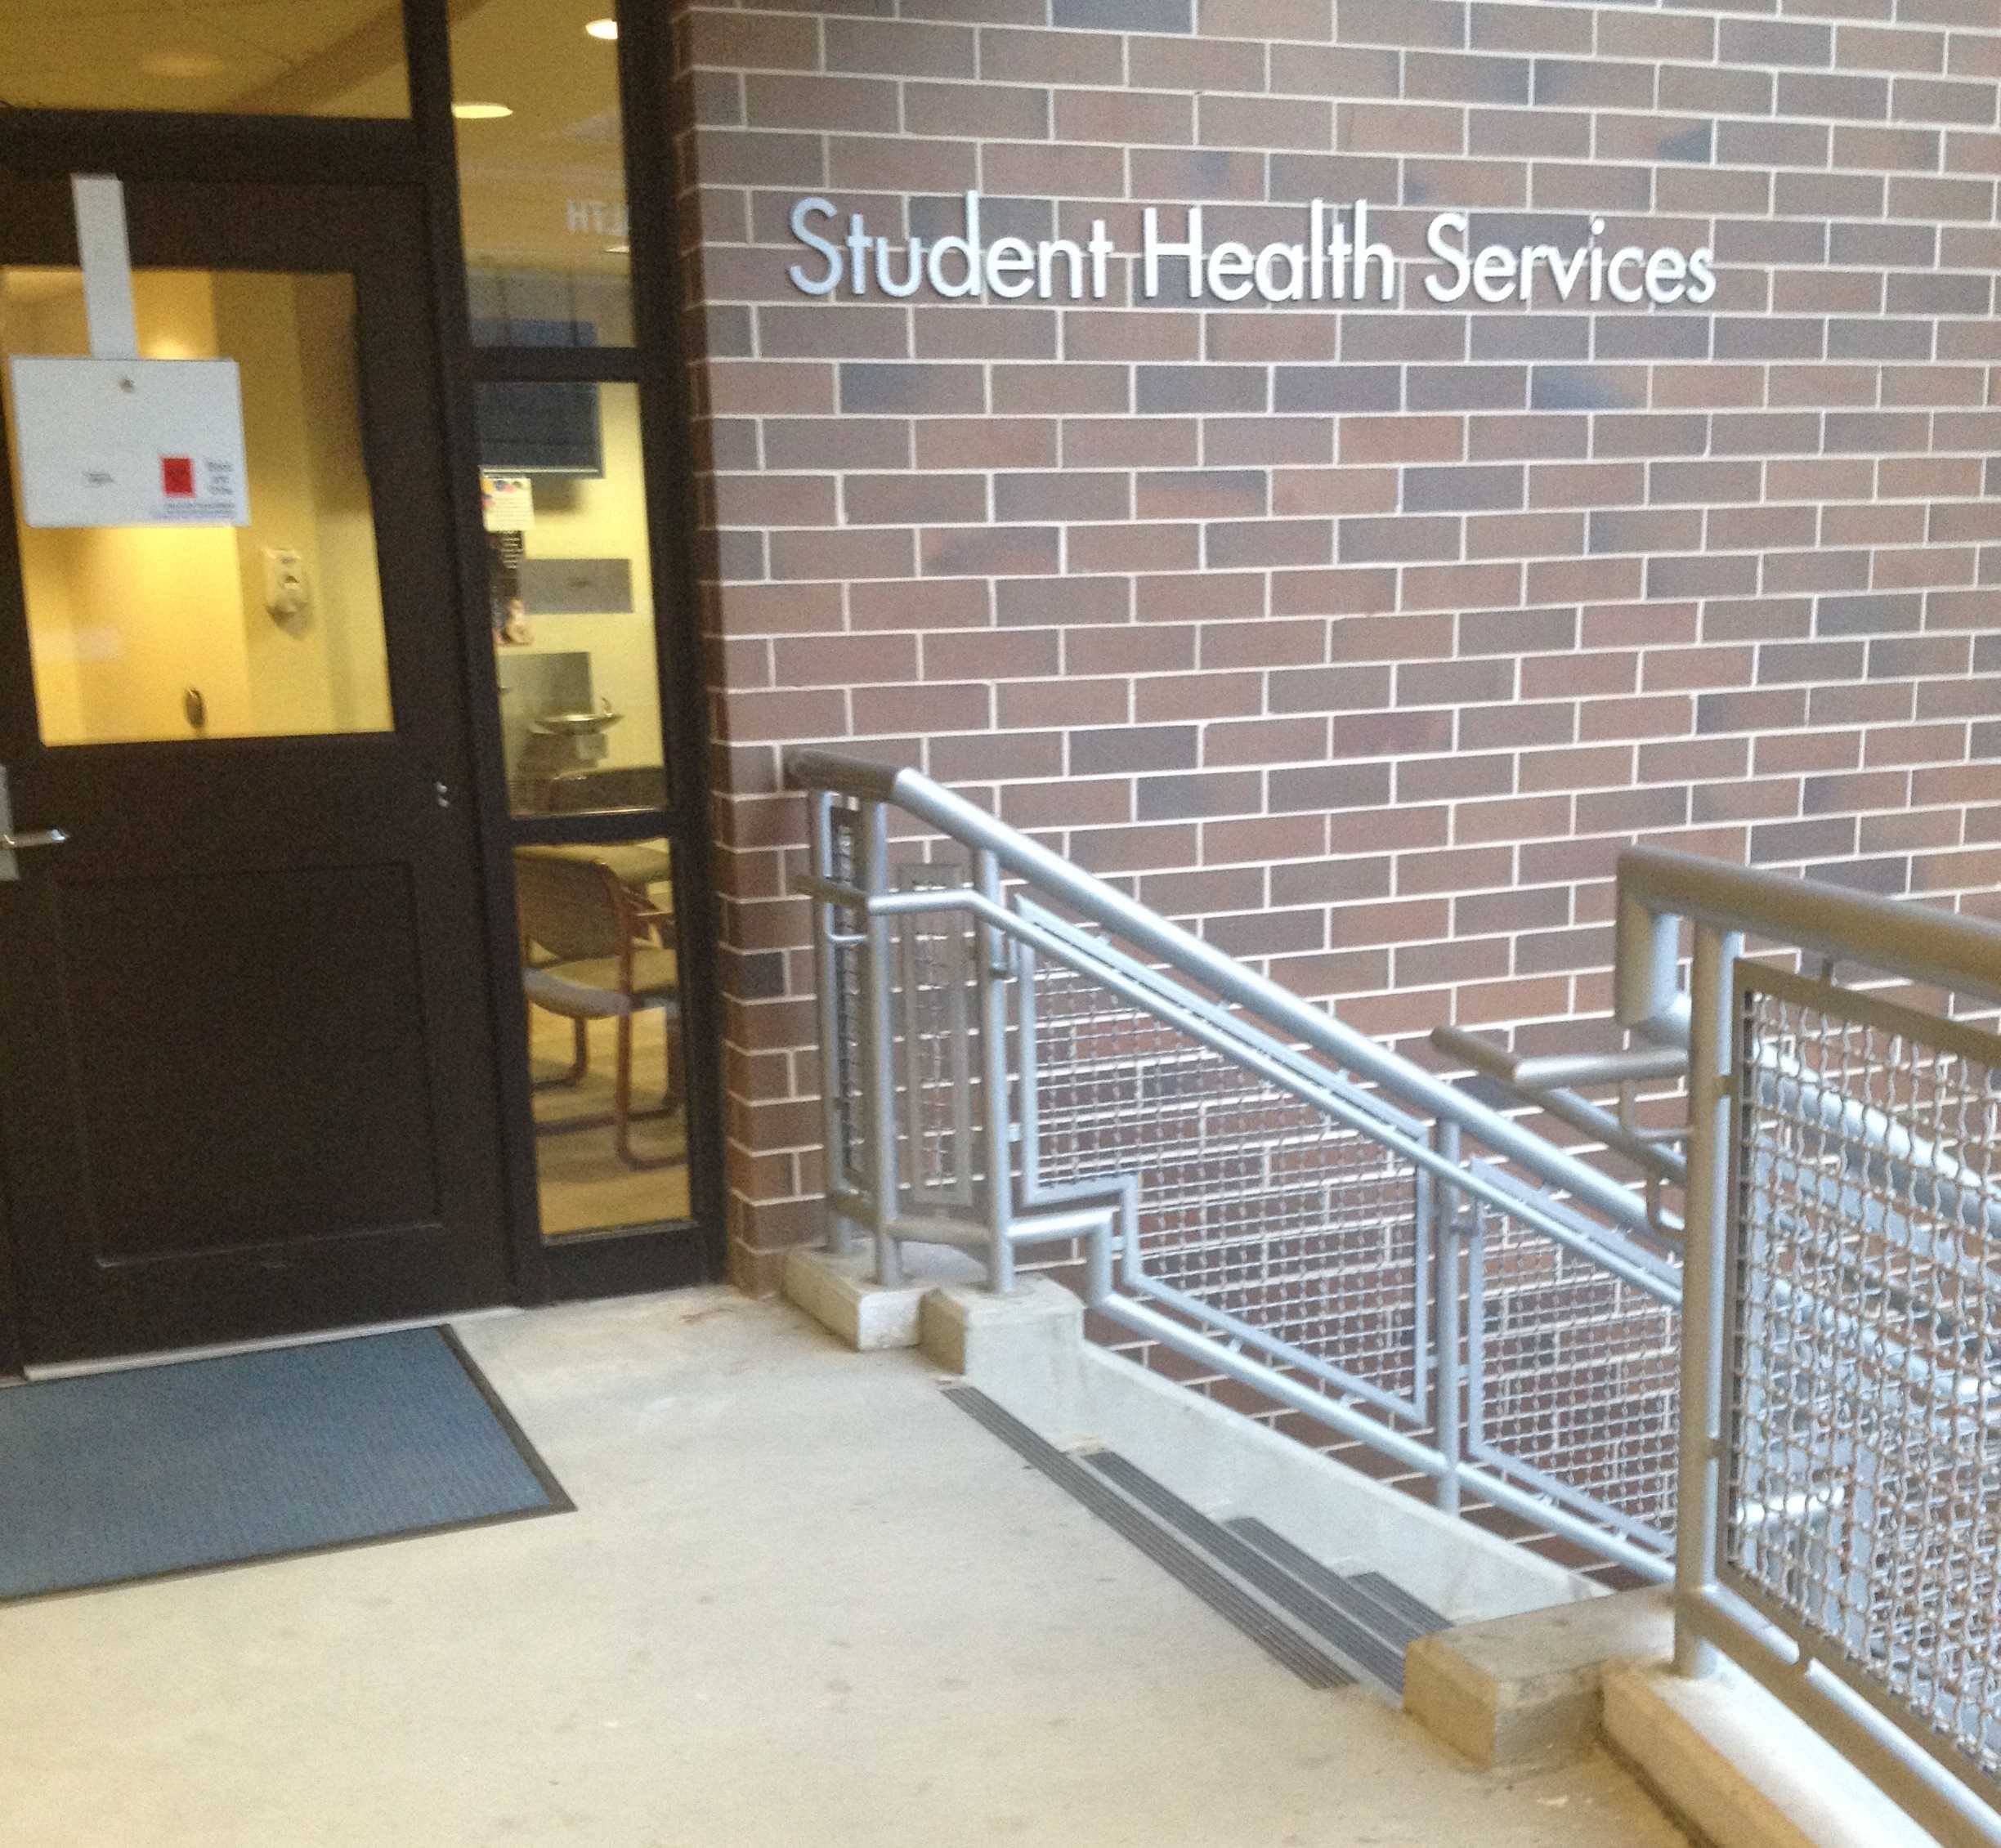 When the doors are locked at Student Health Services, students can call to get advice on medical emergencies. Photo by Michaela Gugliotta